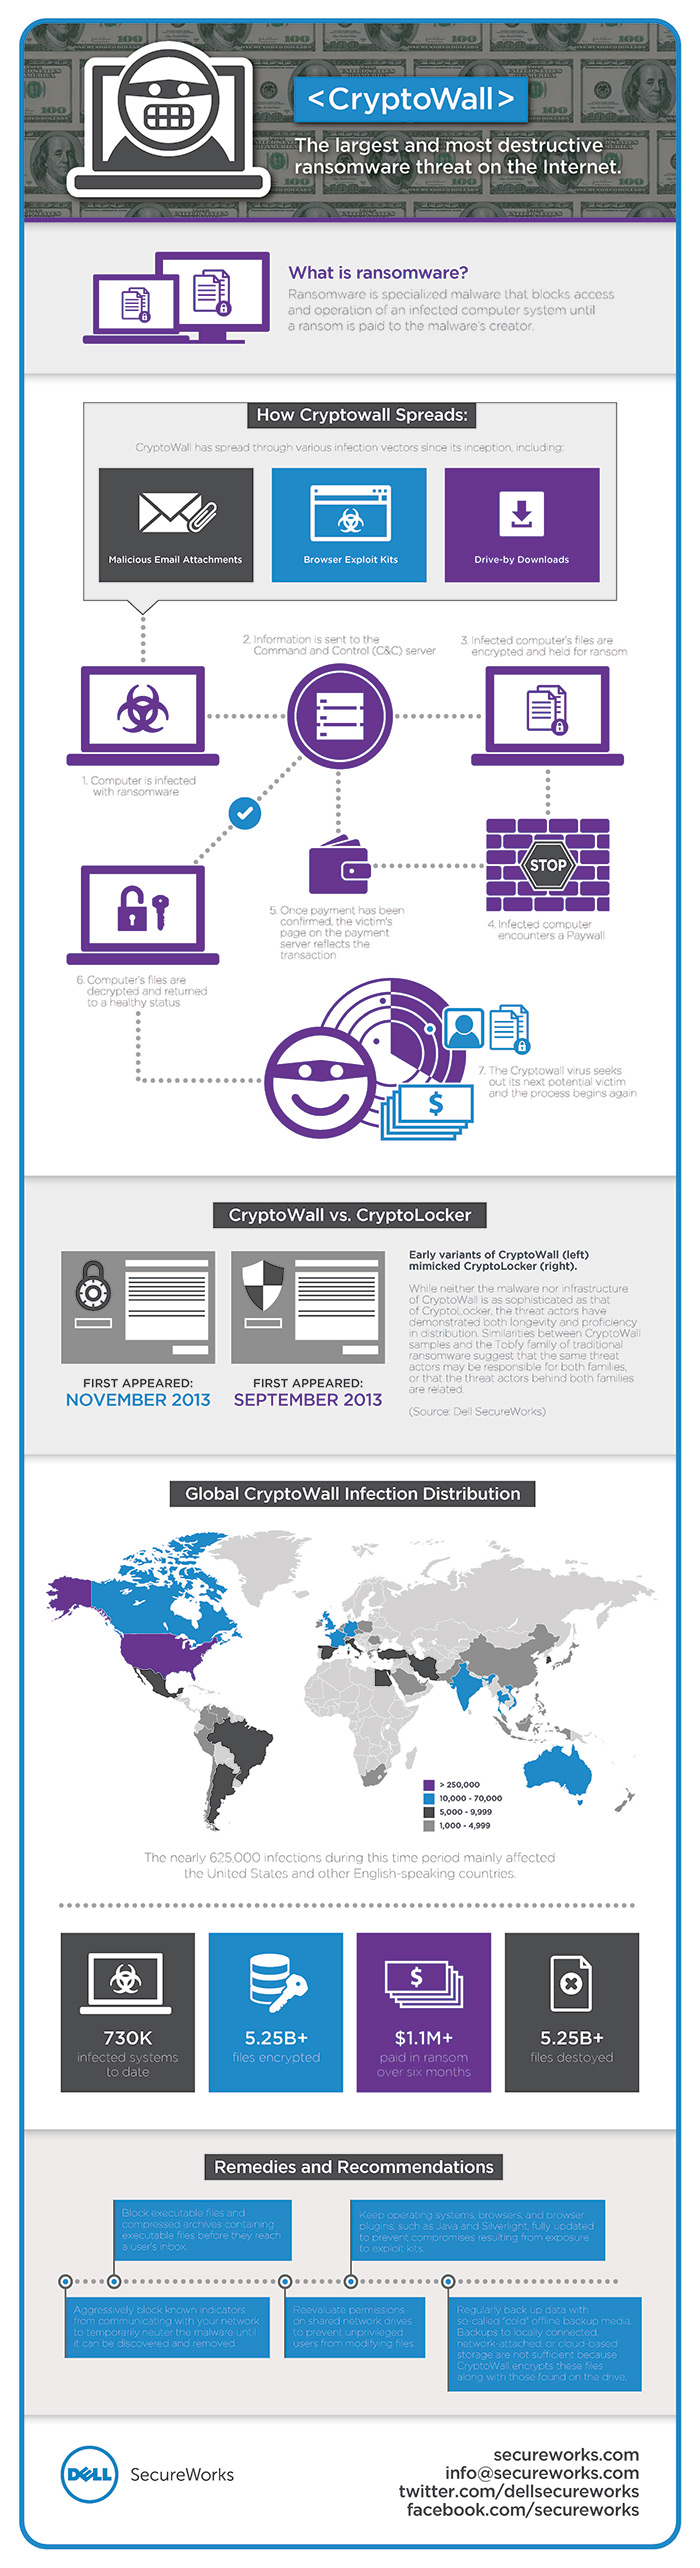 Cryptowall Ransomware Infographic